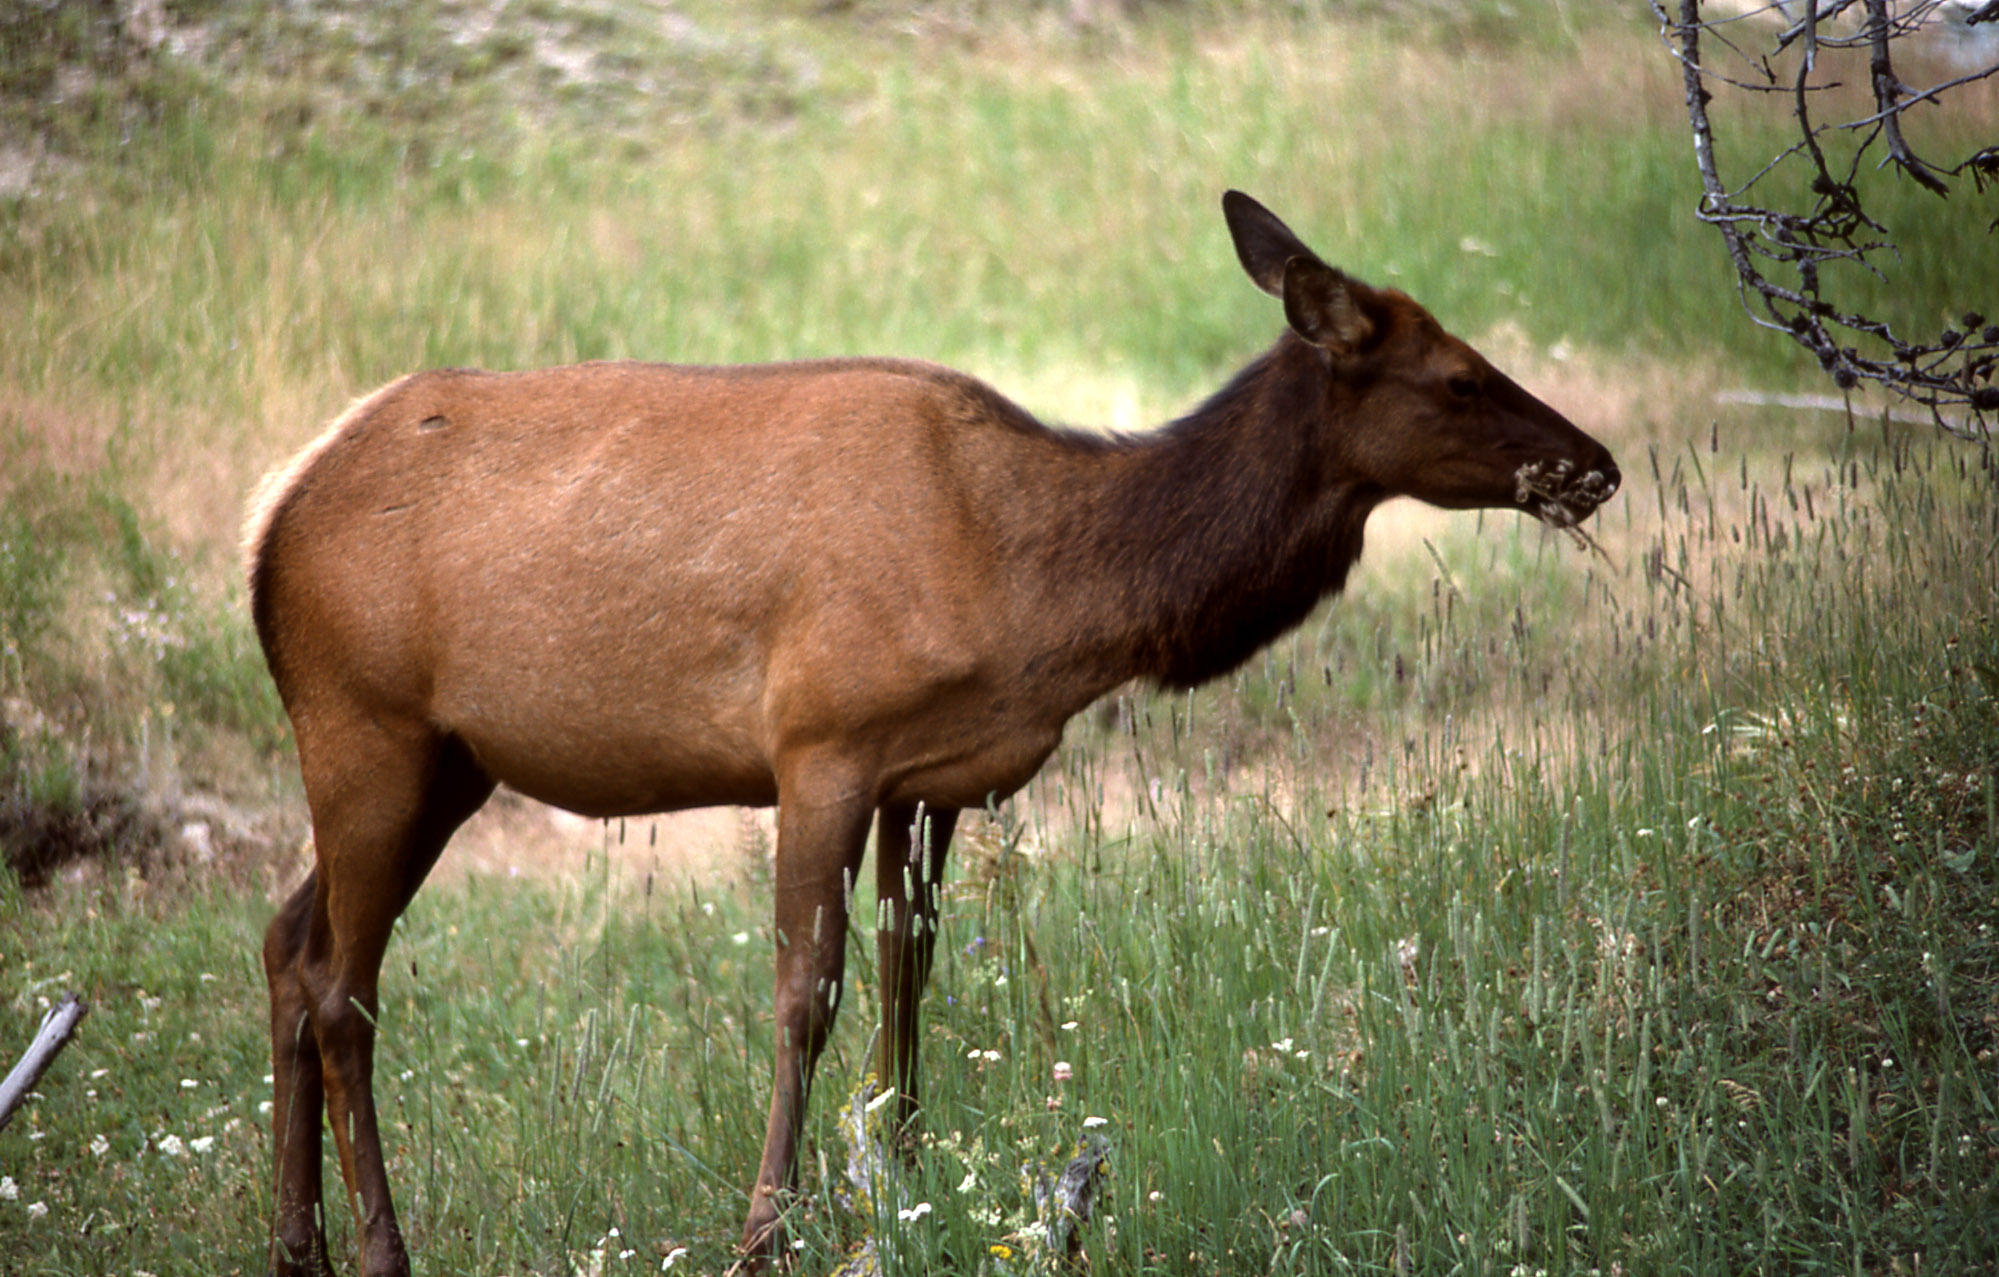 Poaching Of A Cow Elk And Calf Reported In Northern Arizona | KNAU ...